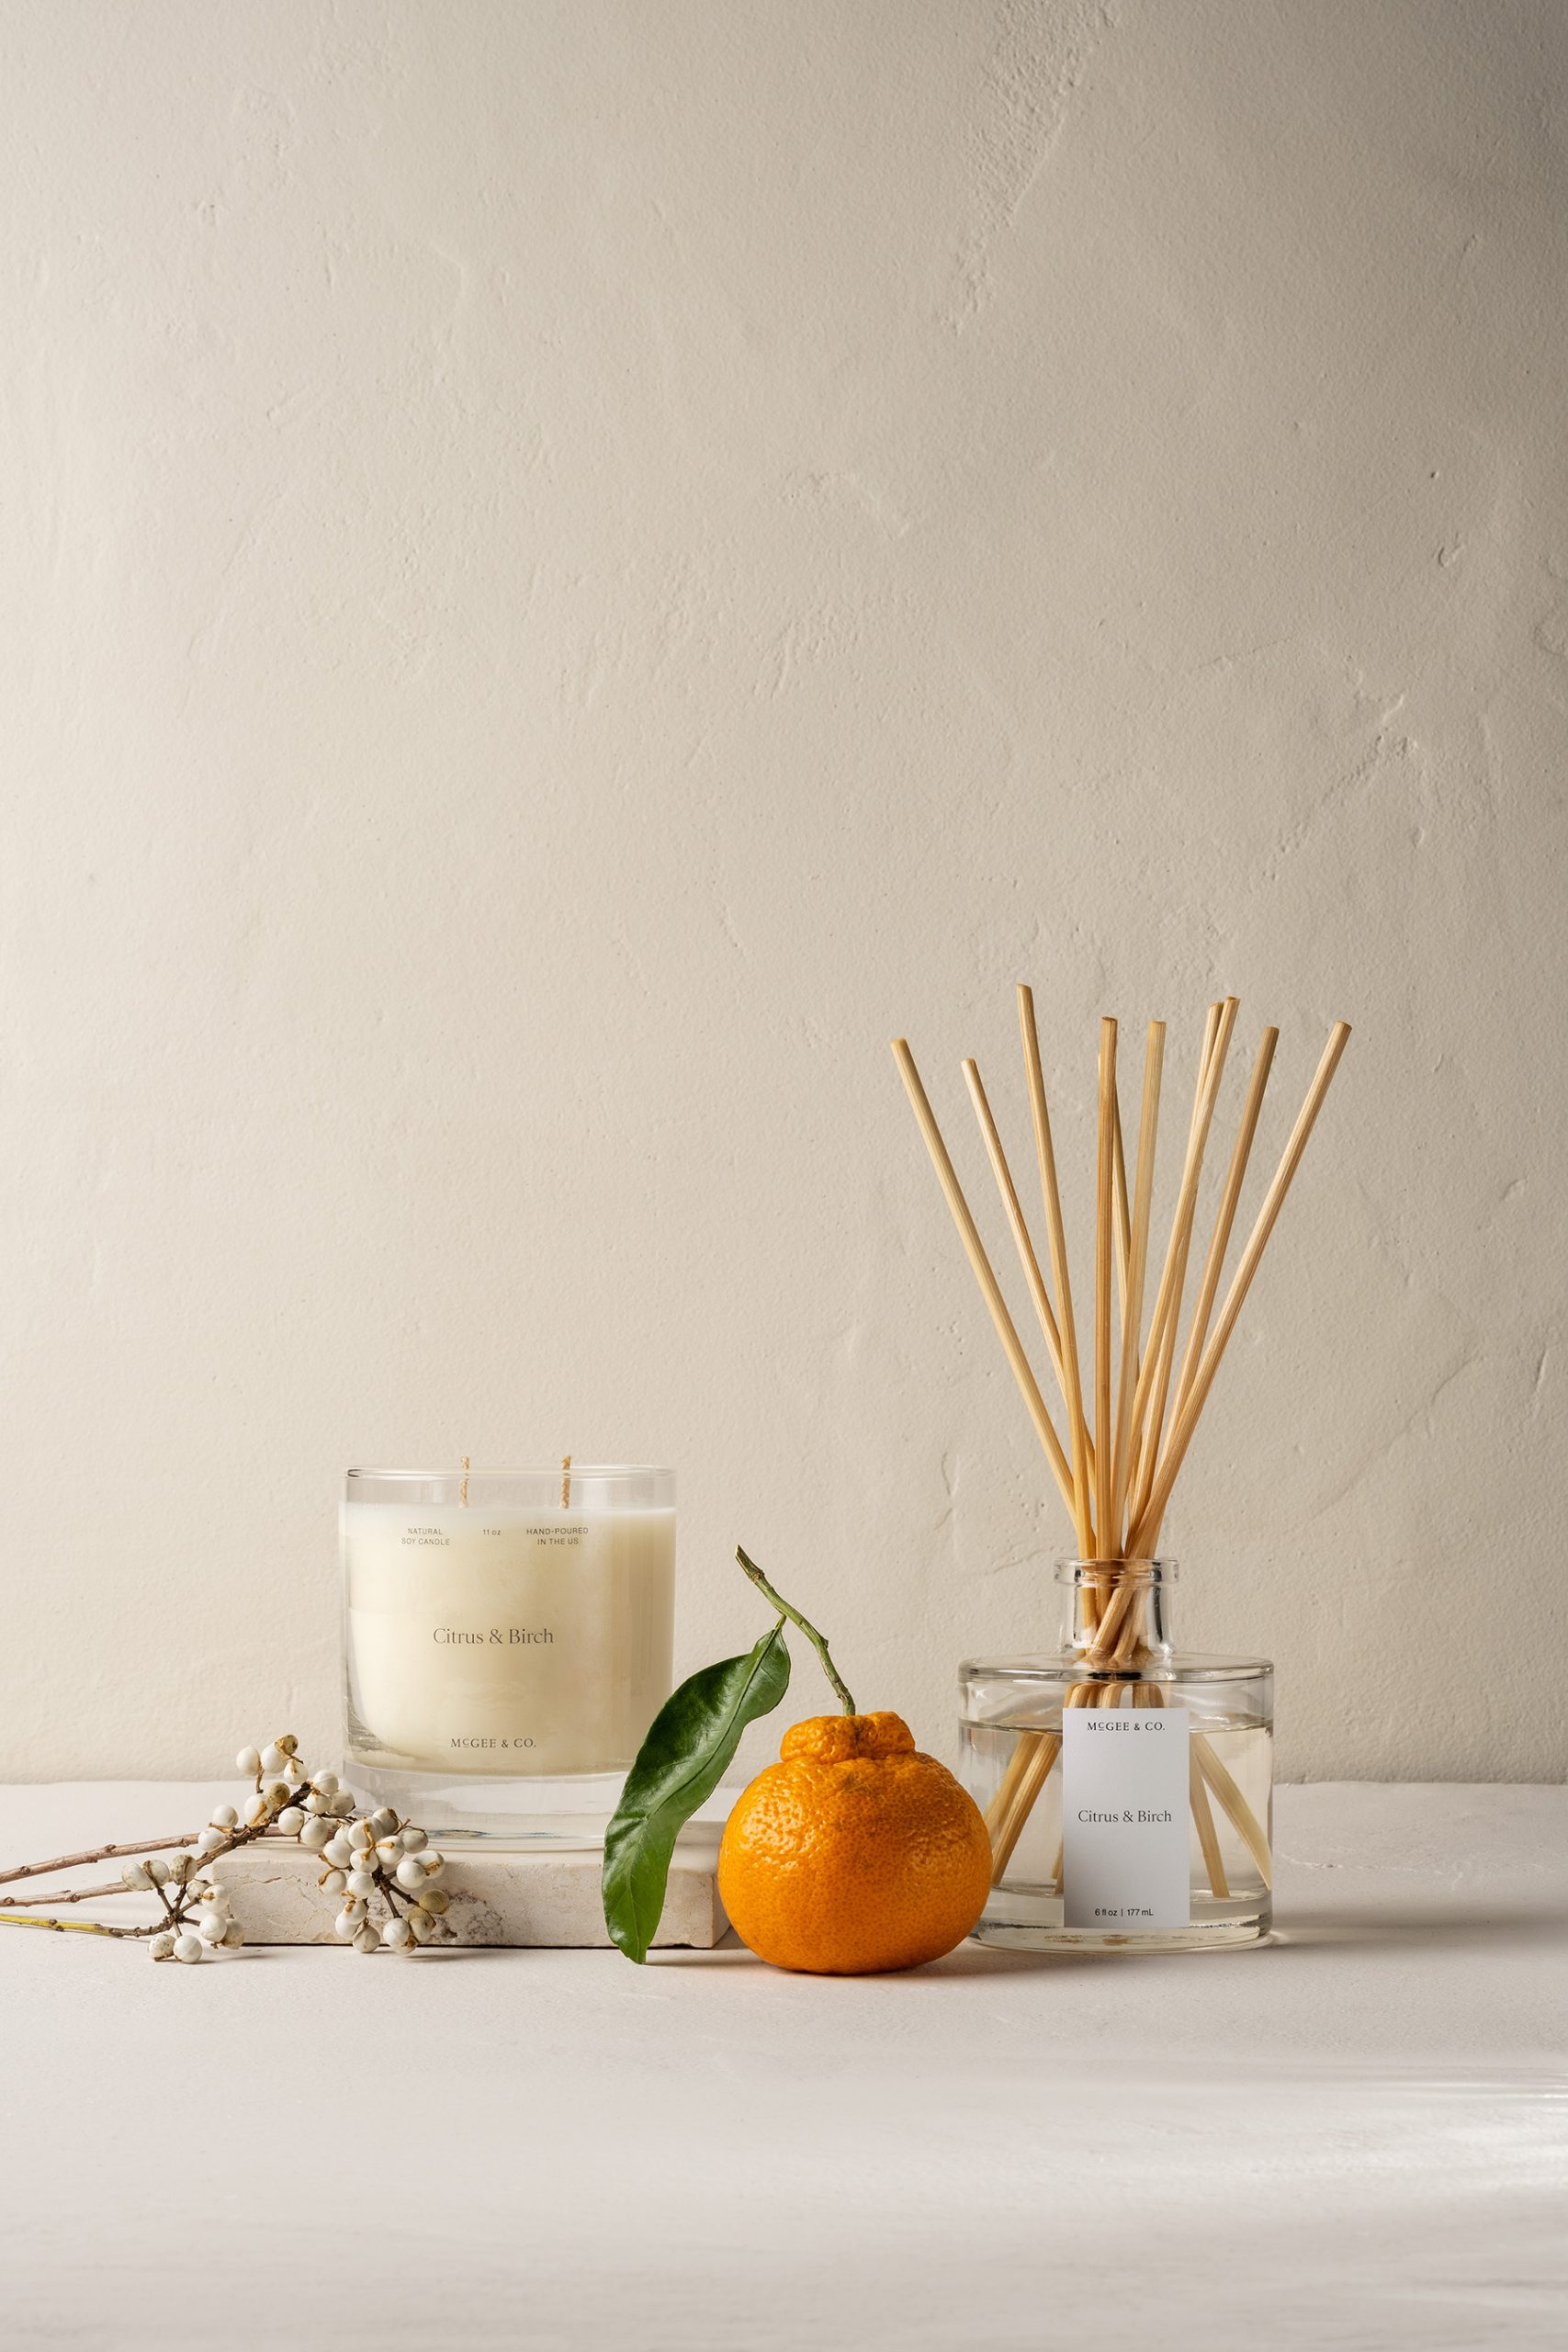 McGee & Co Citrus & Birch Candle